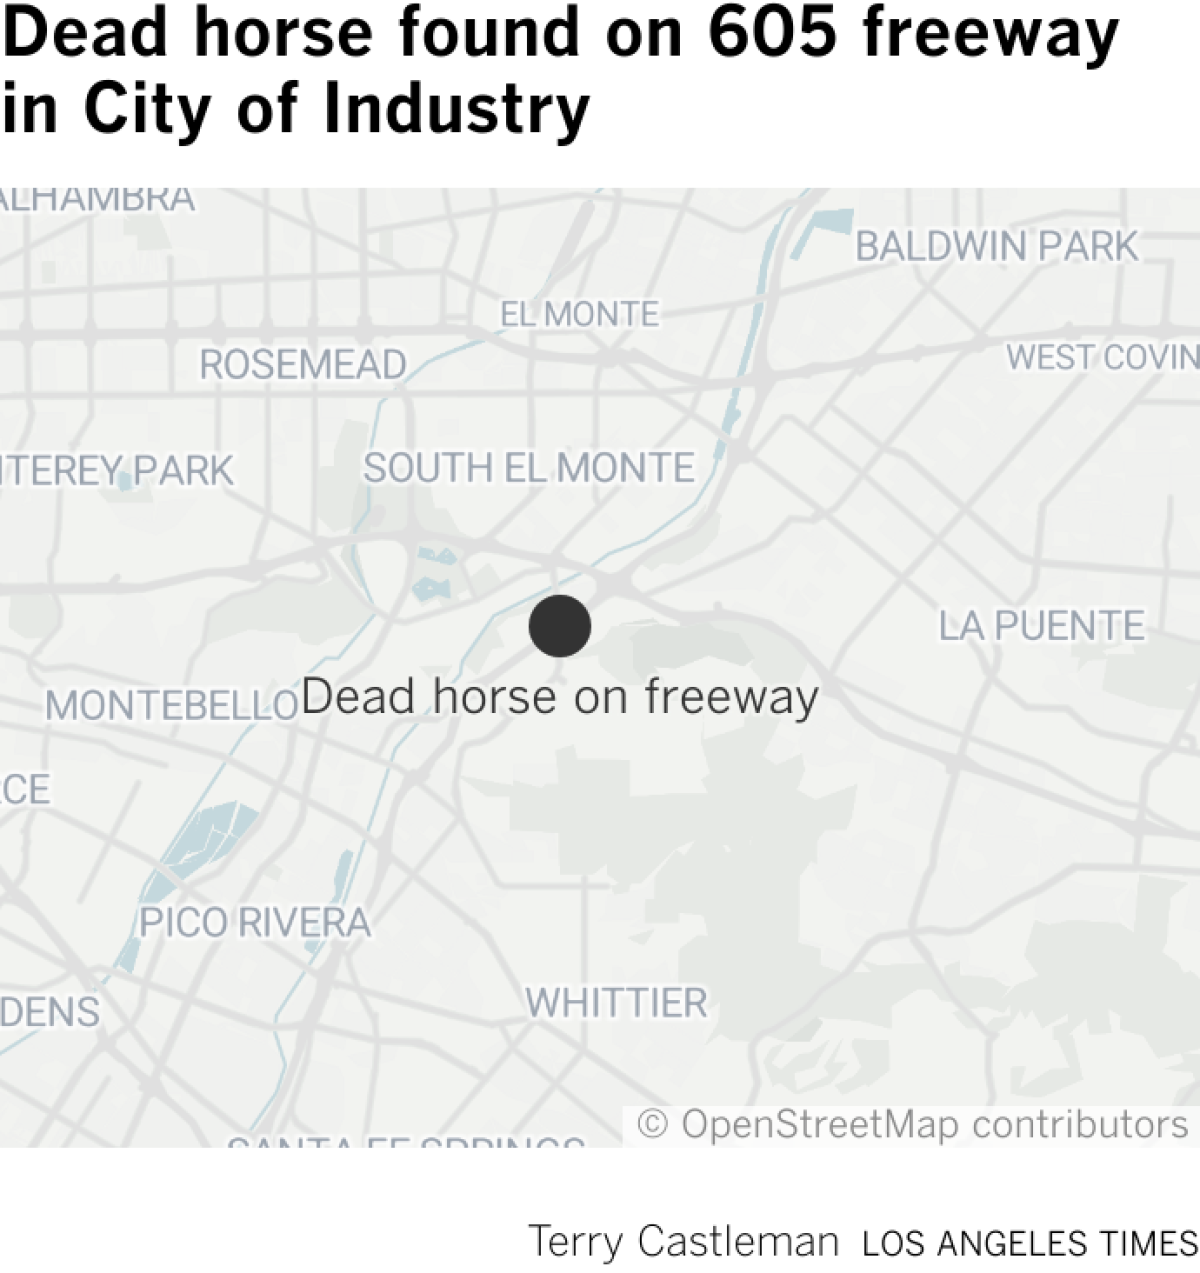 Map showing 605 freeway location where dead horse was found